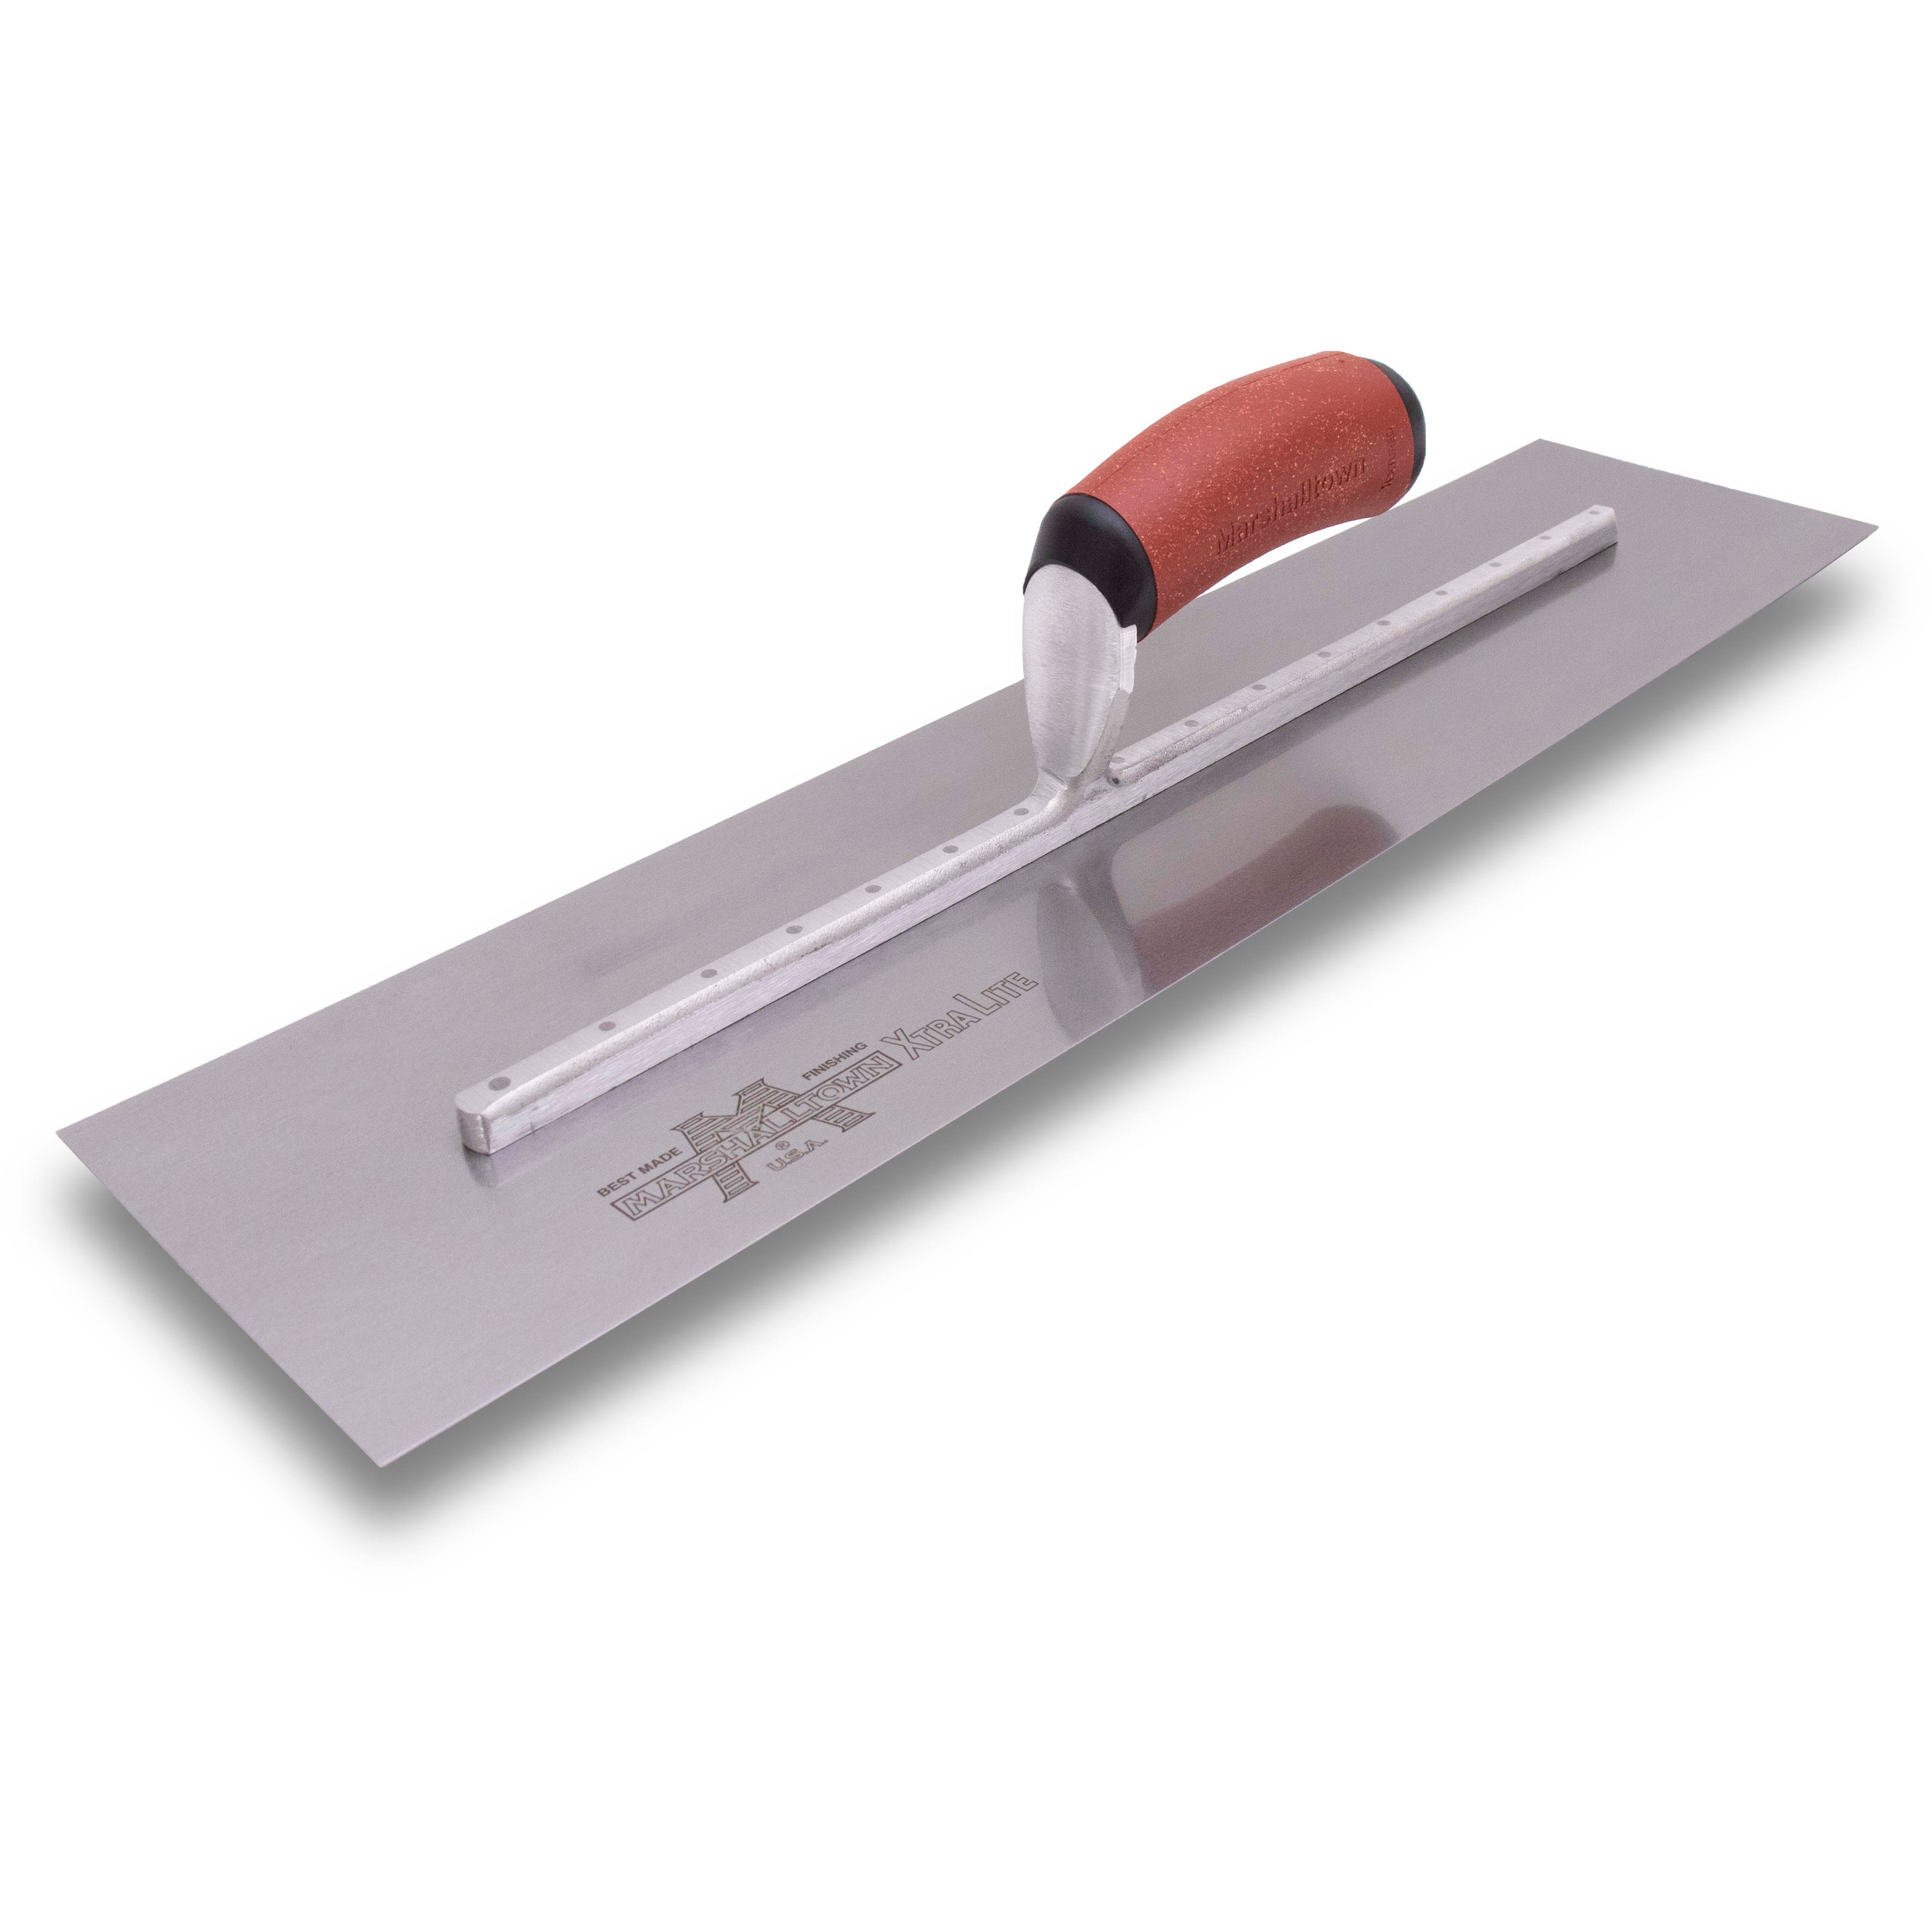 Marshalltown MXS2DC 11-1/2in x 4-1/2in Finishing Trowel with DuraCork Handle MXS2DC